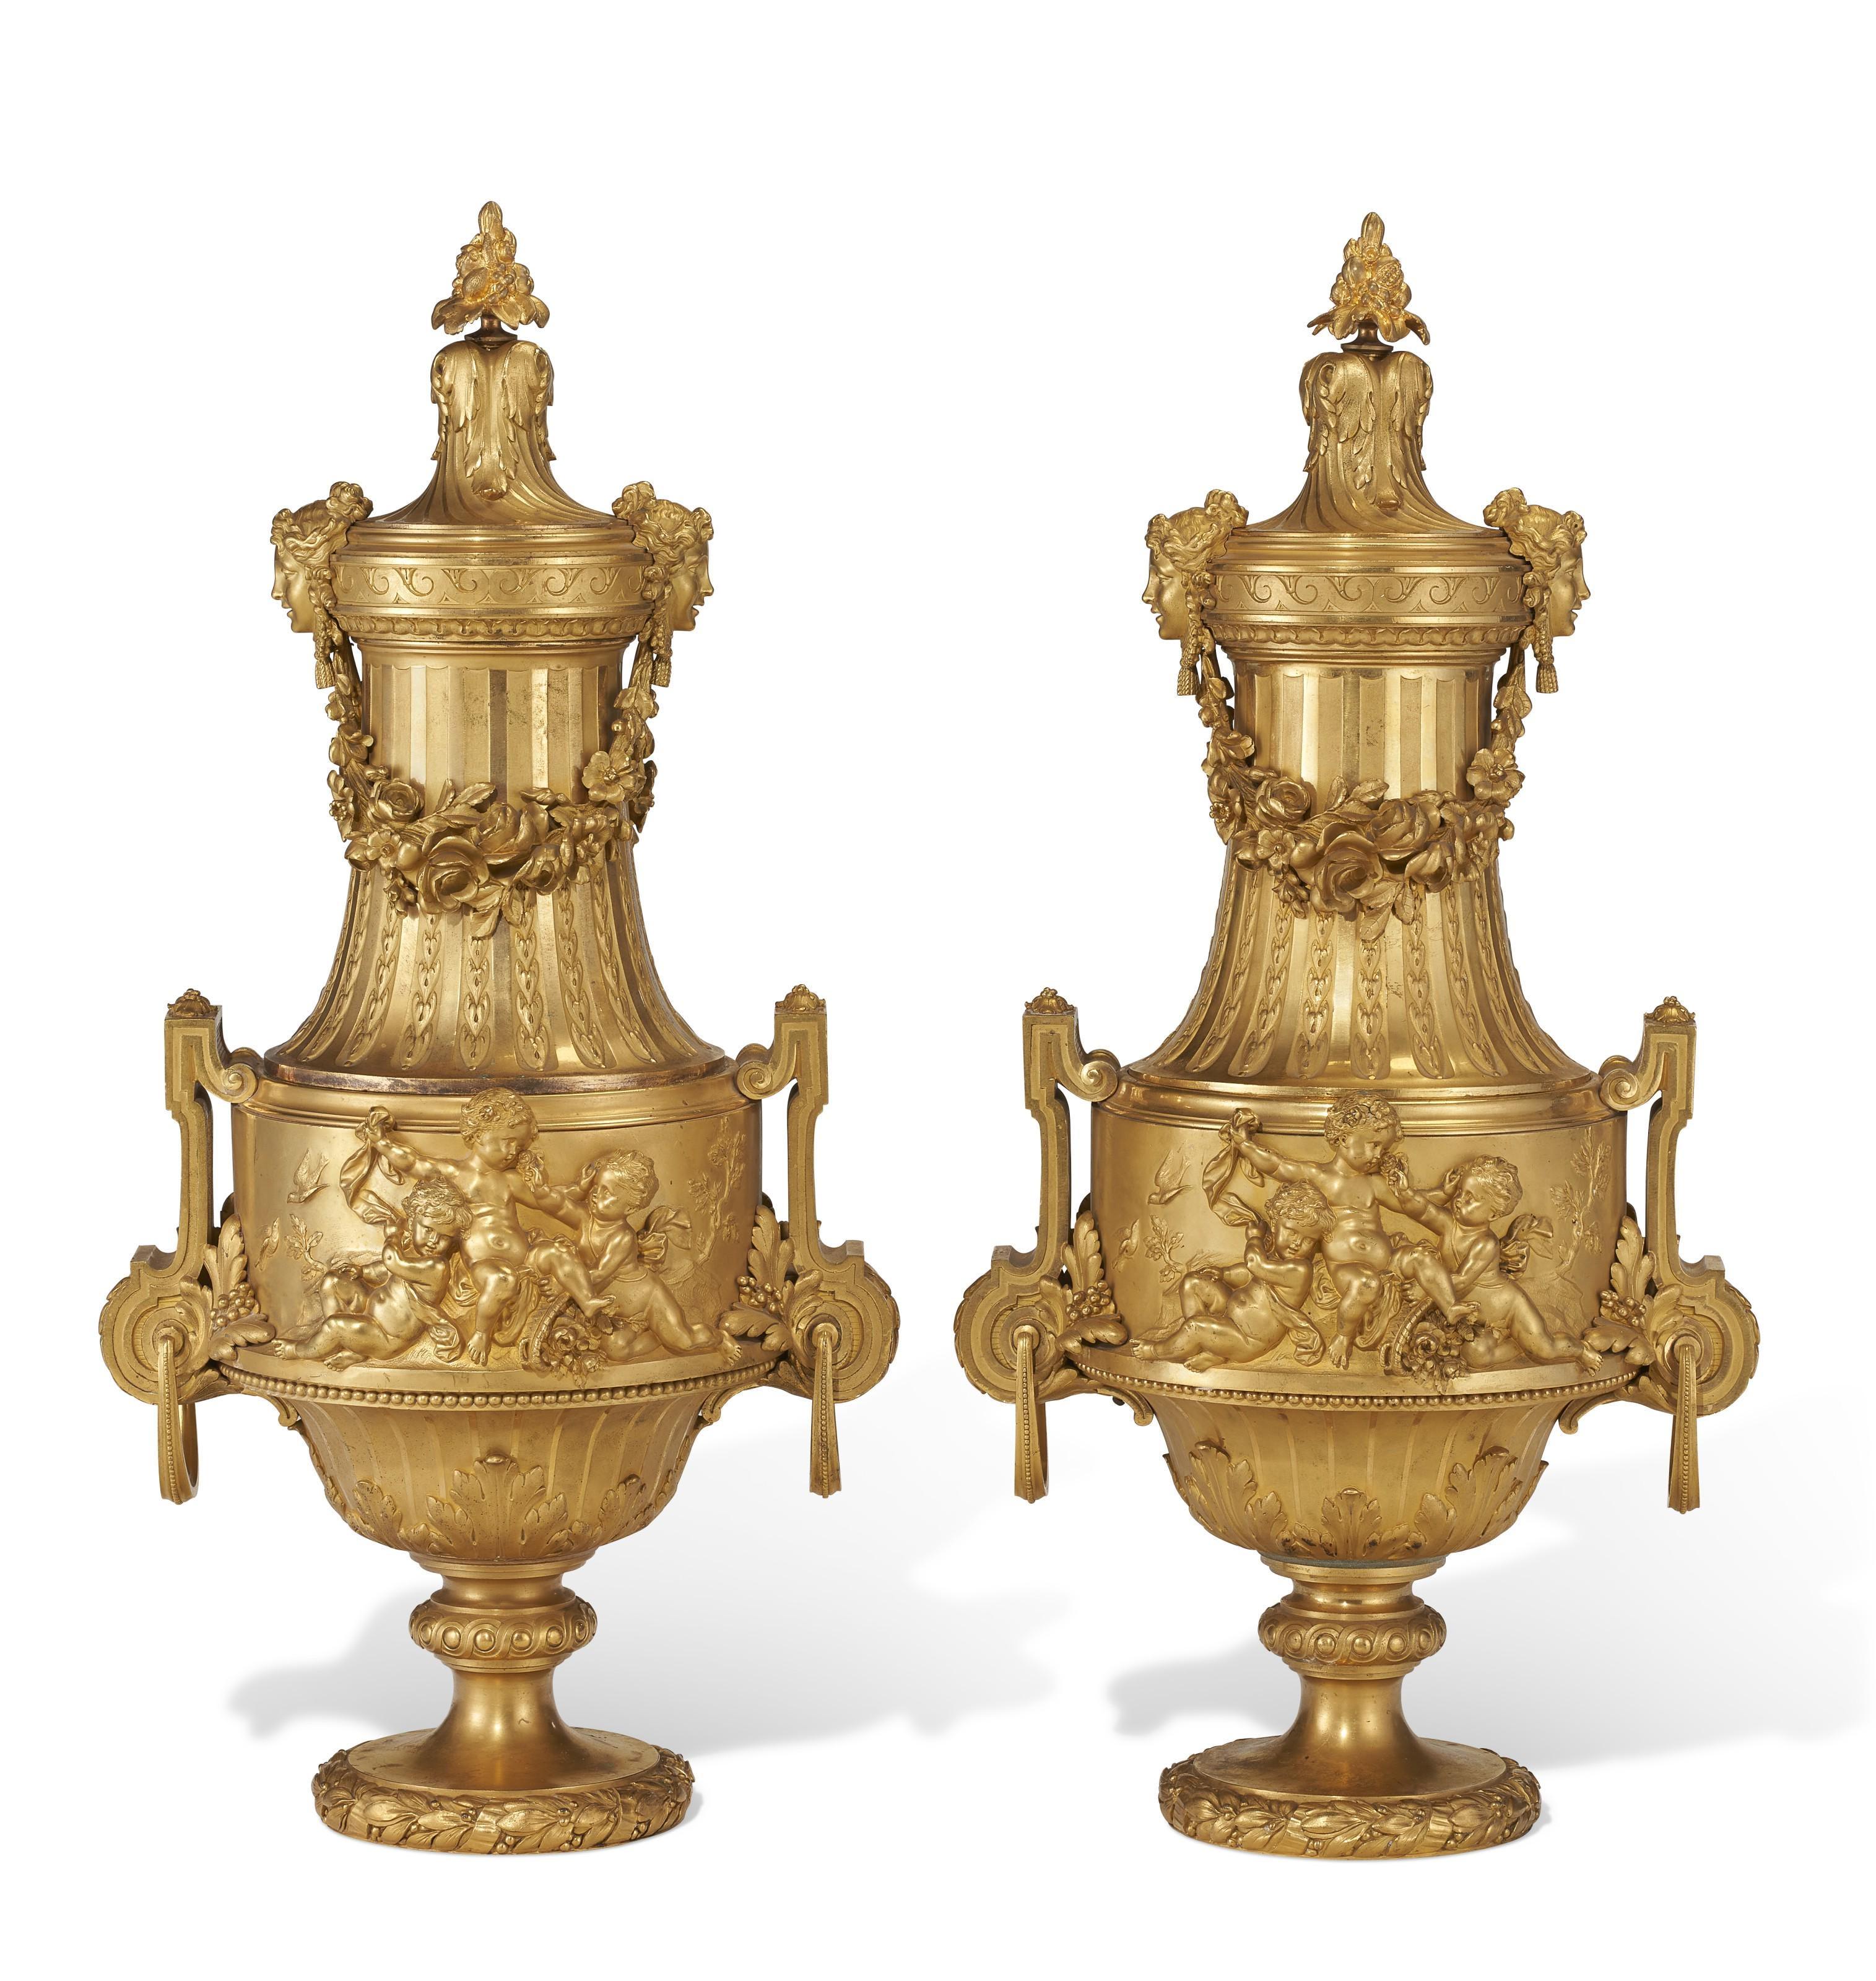 Our pair of exceptional ormolu bronze urns are attributed to French designer, Maxime Secretant, circa 1890s. They feature spiral-gadrooned necks flanked by female masks linked by suspended floral swags and bodies cast in relief with putti in